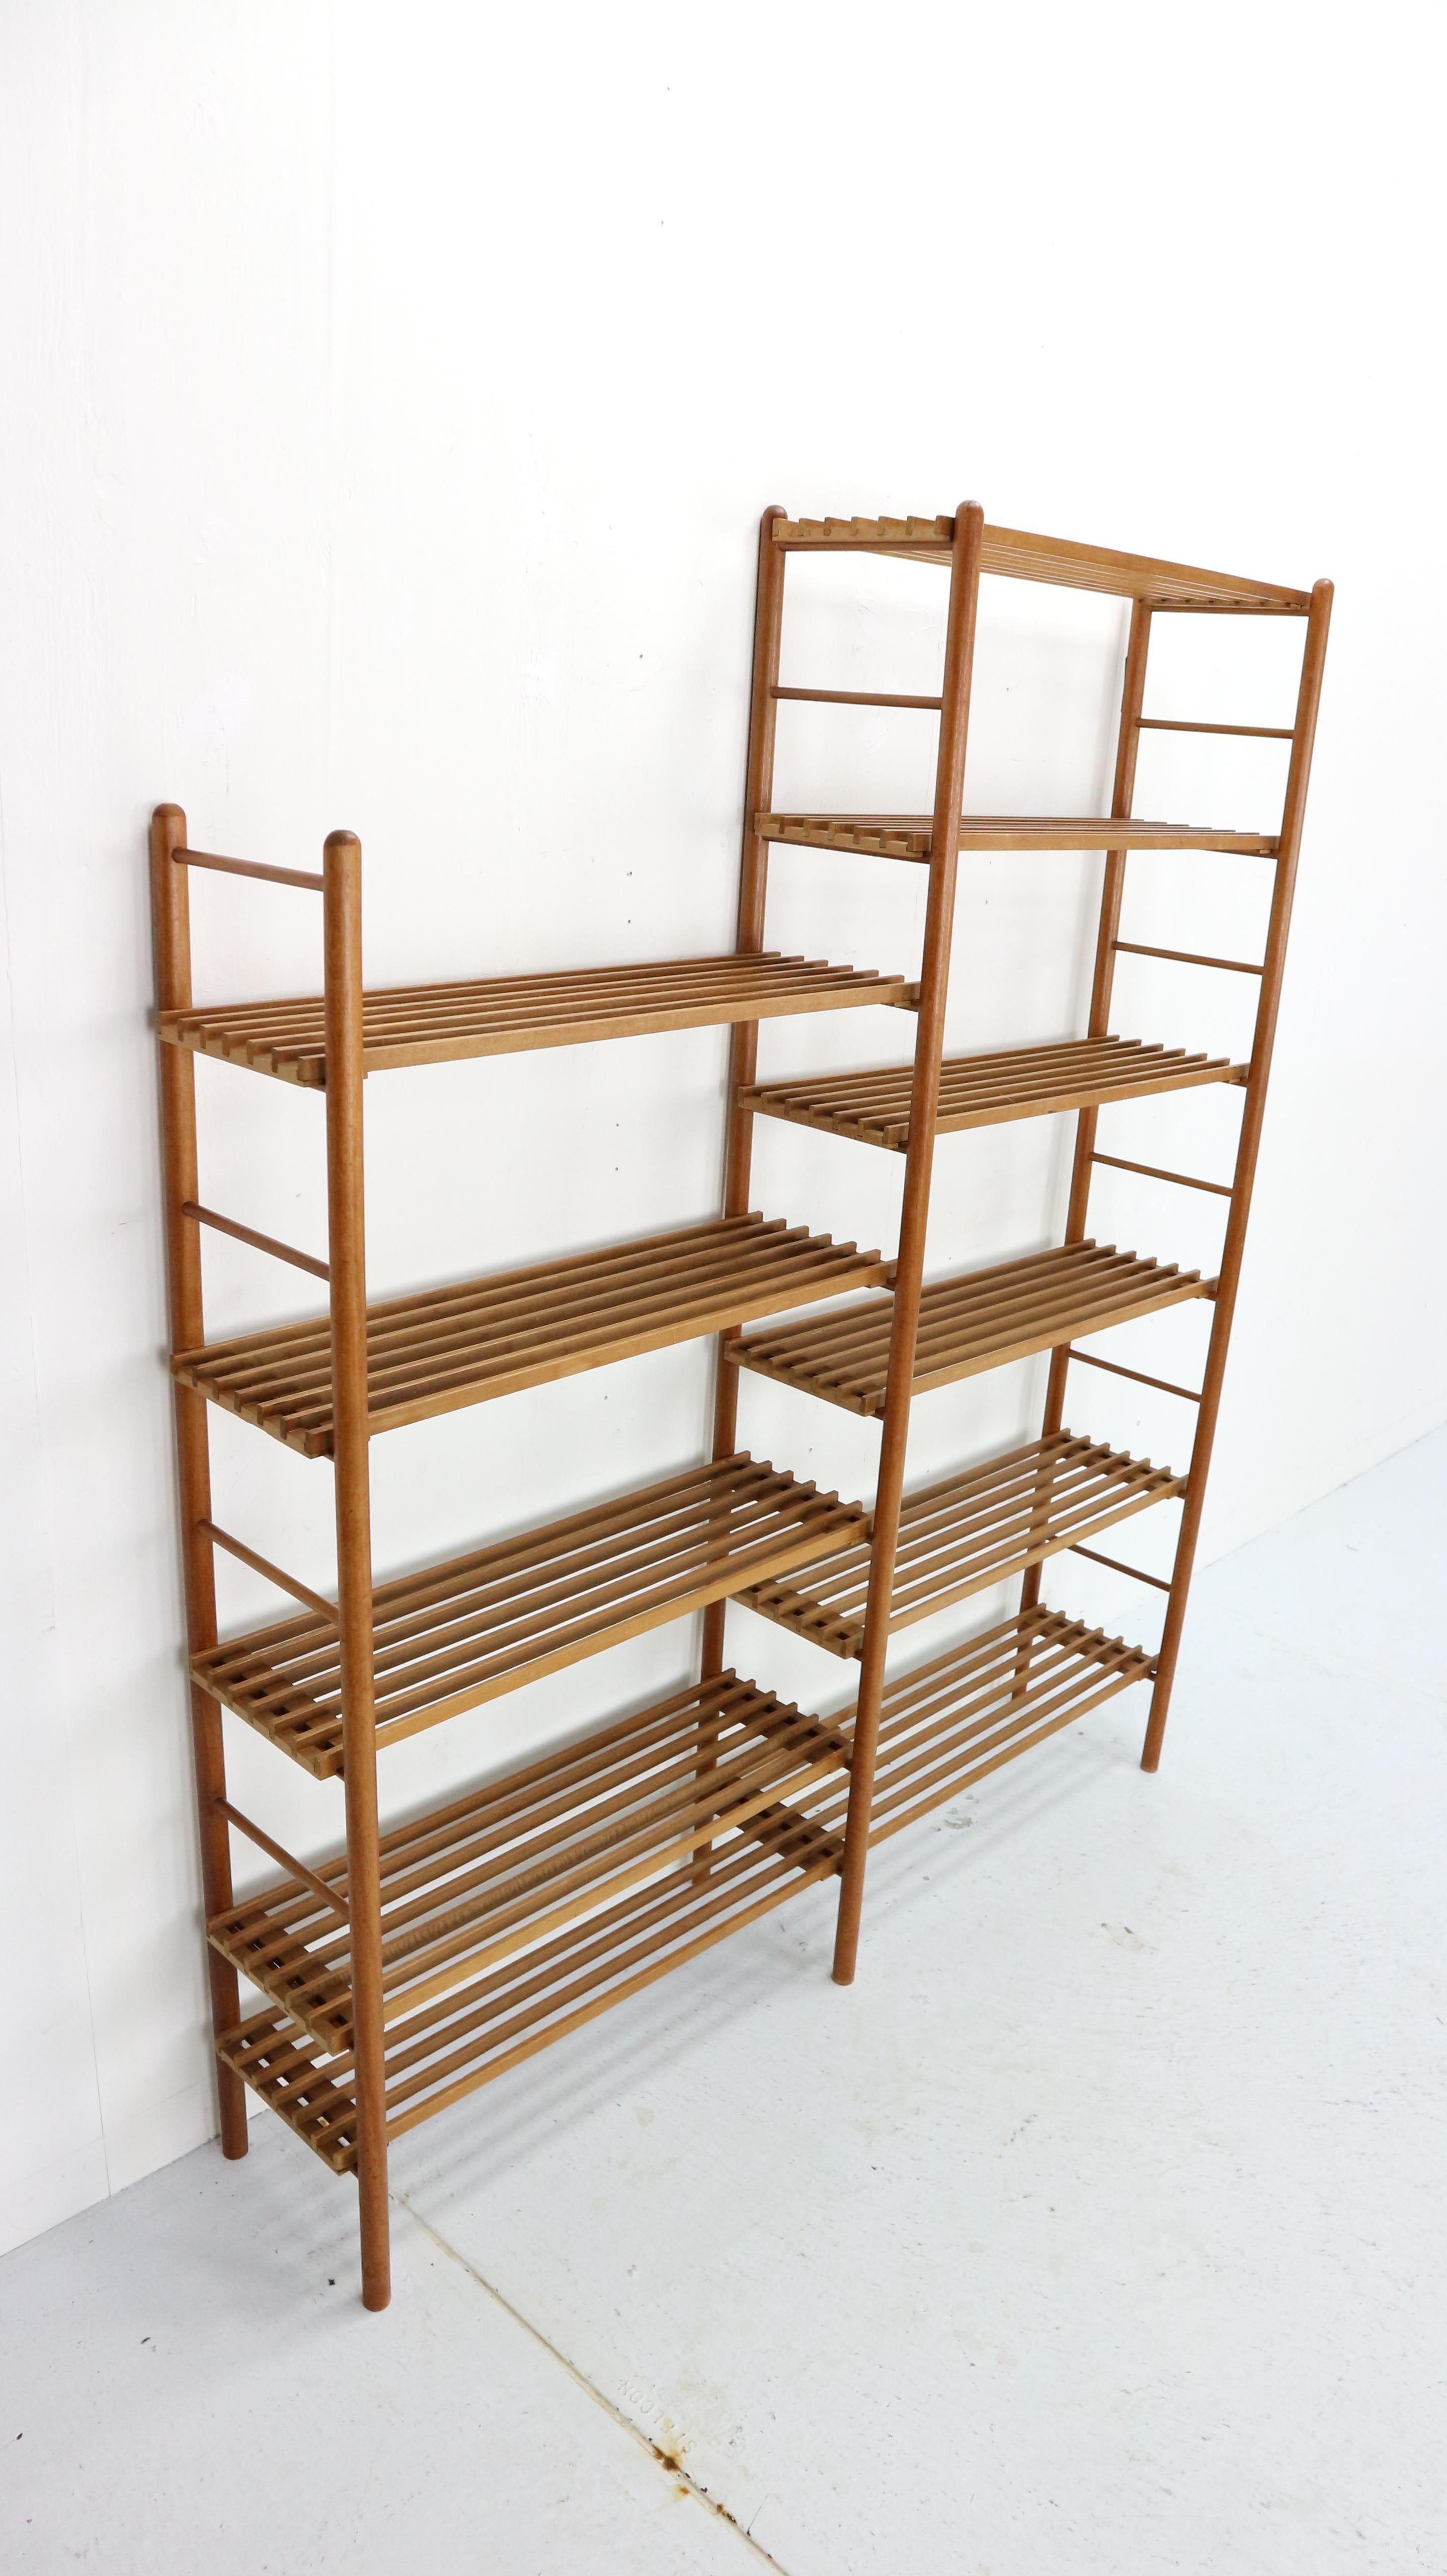 Unique mid century modern bookcase in the style of Wilhelm Lutjens for Den Boer, unfortunately the original designer is unknown. Made in the Netherlands in 1960's period.

This bookcase is made of solid teak wood poles and shelves in teak